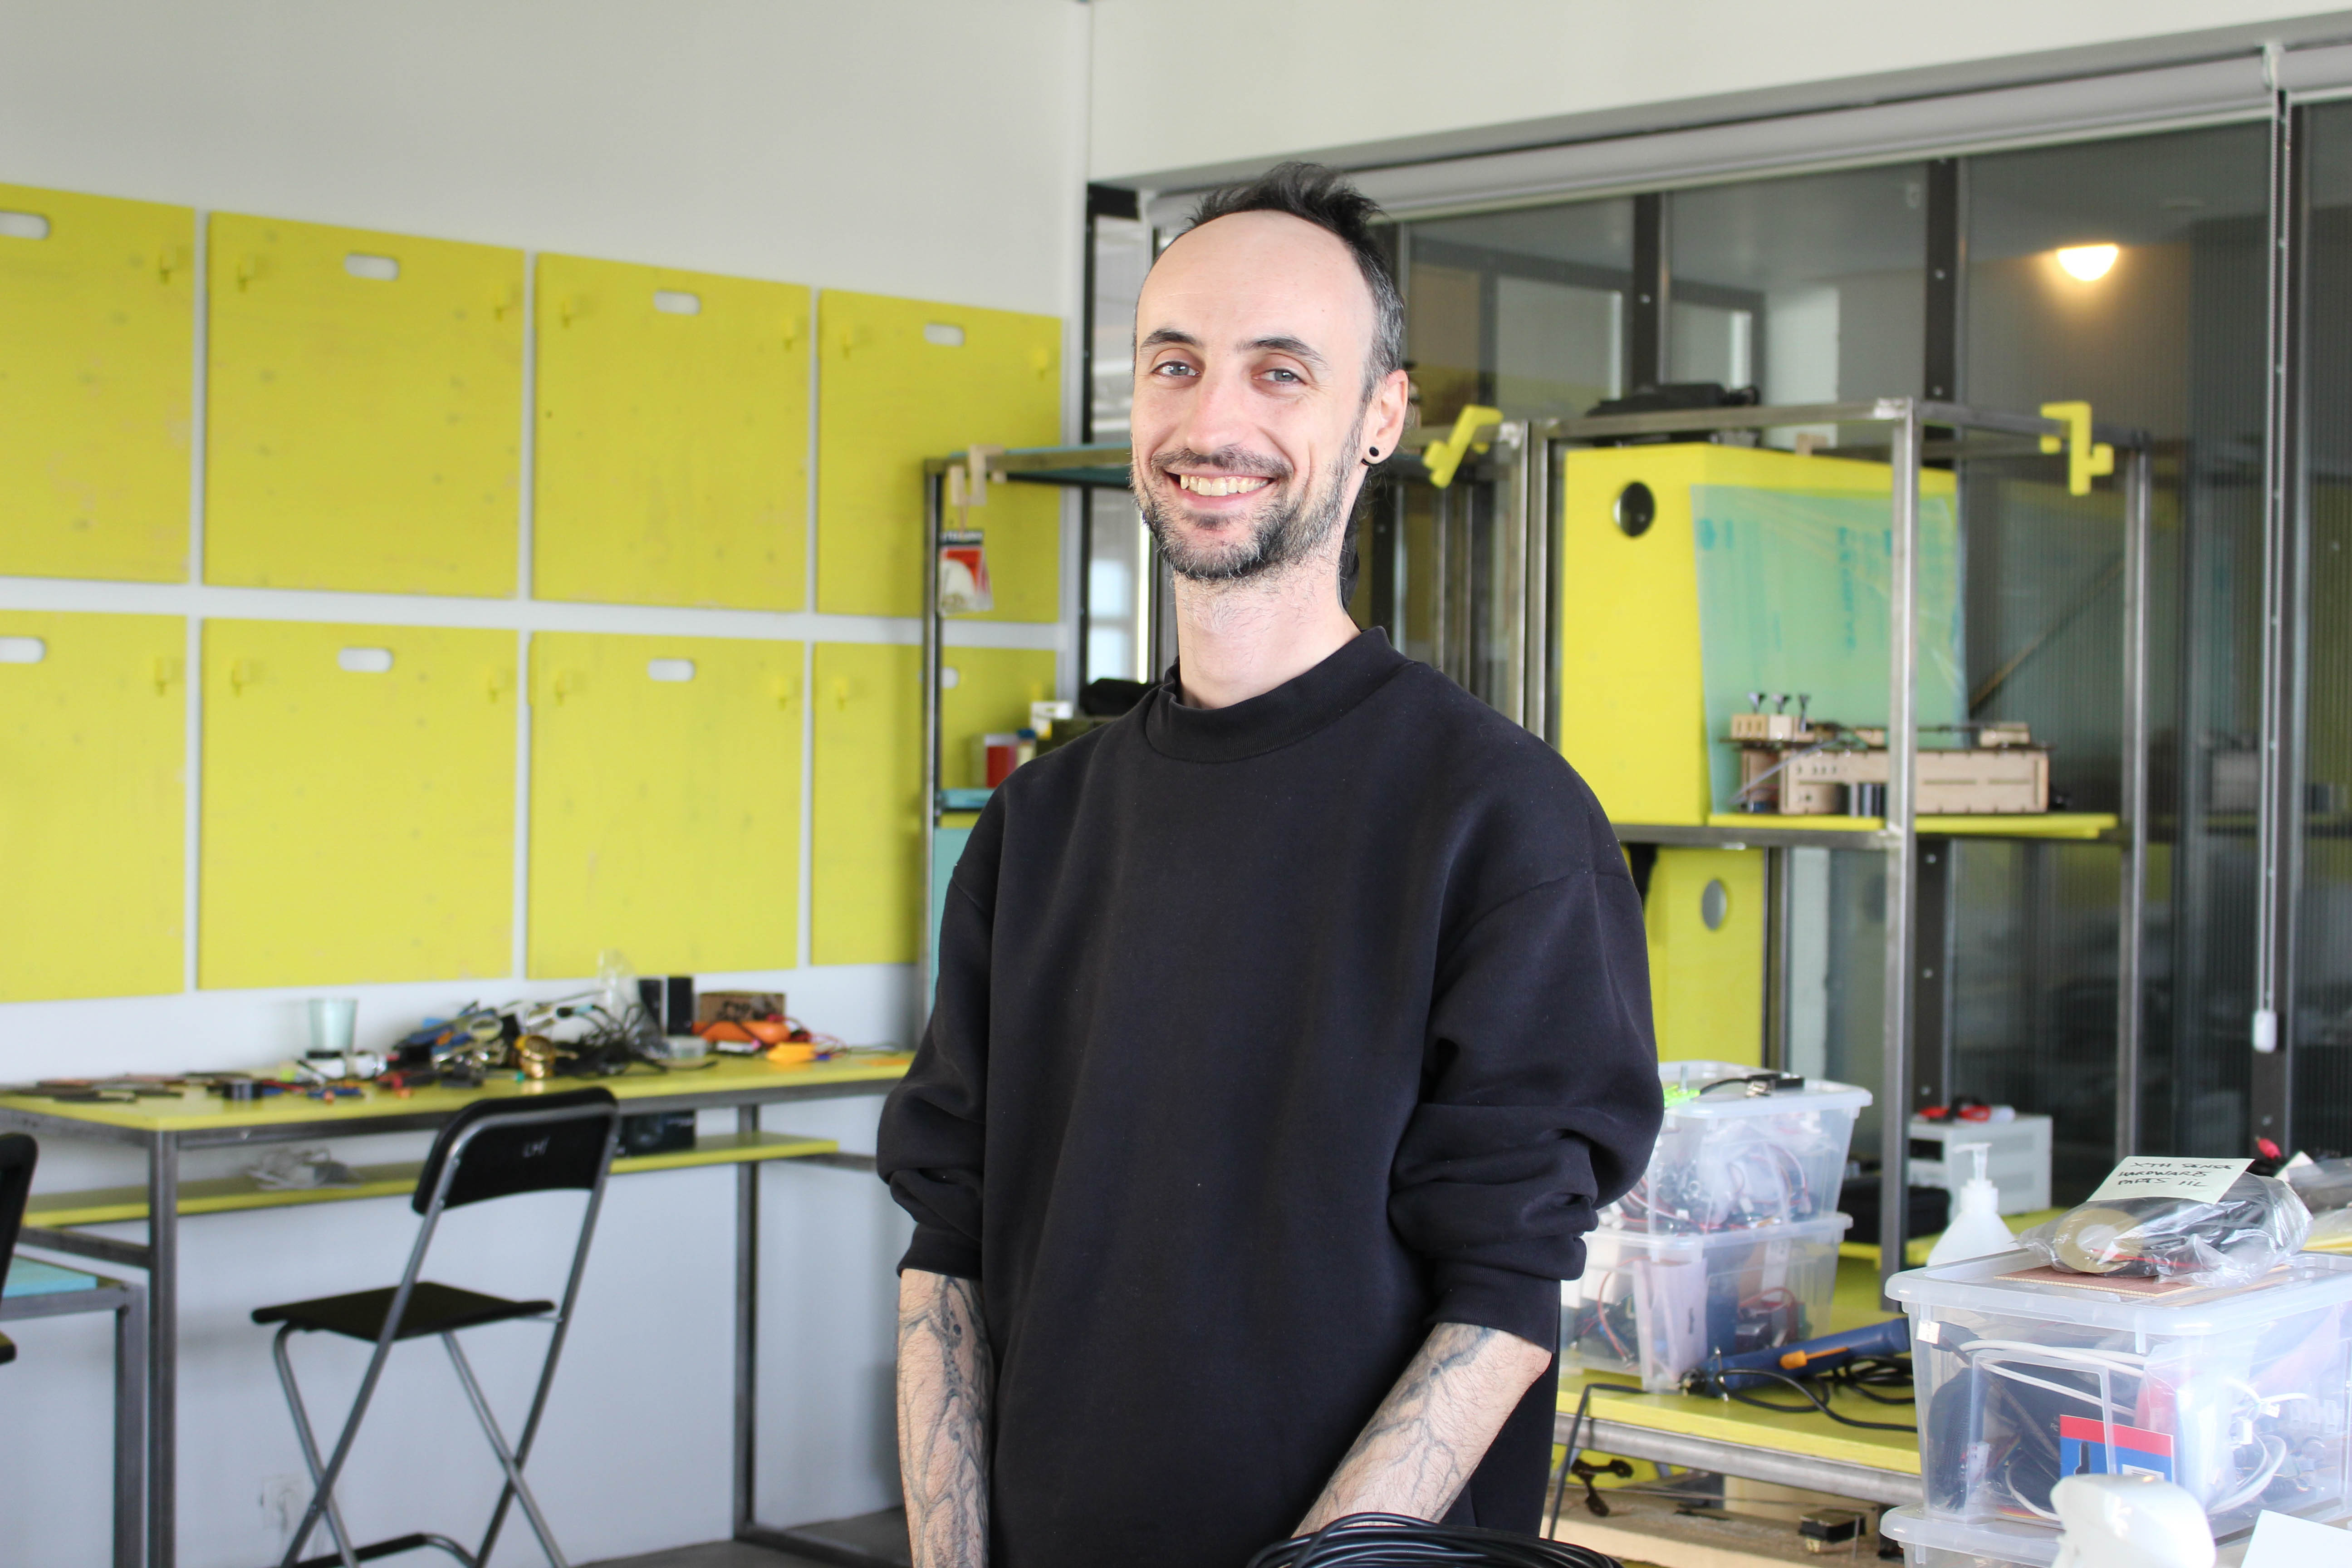 A person smiling in the lab, yellow shelving system in background